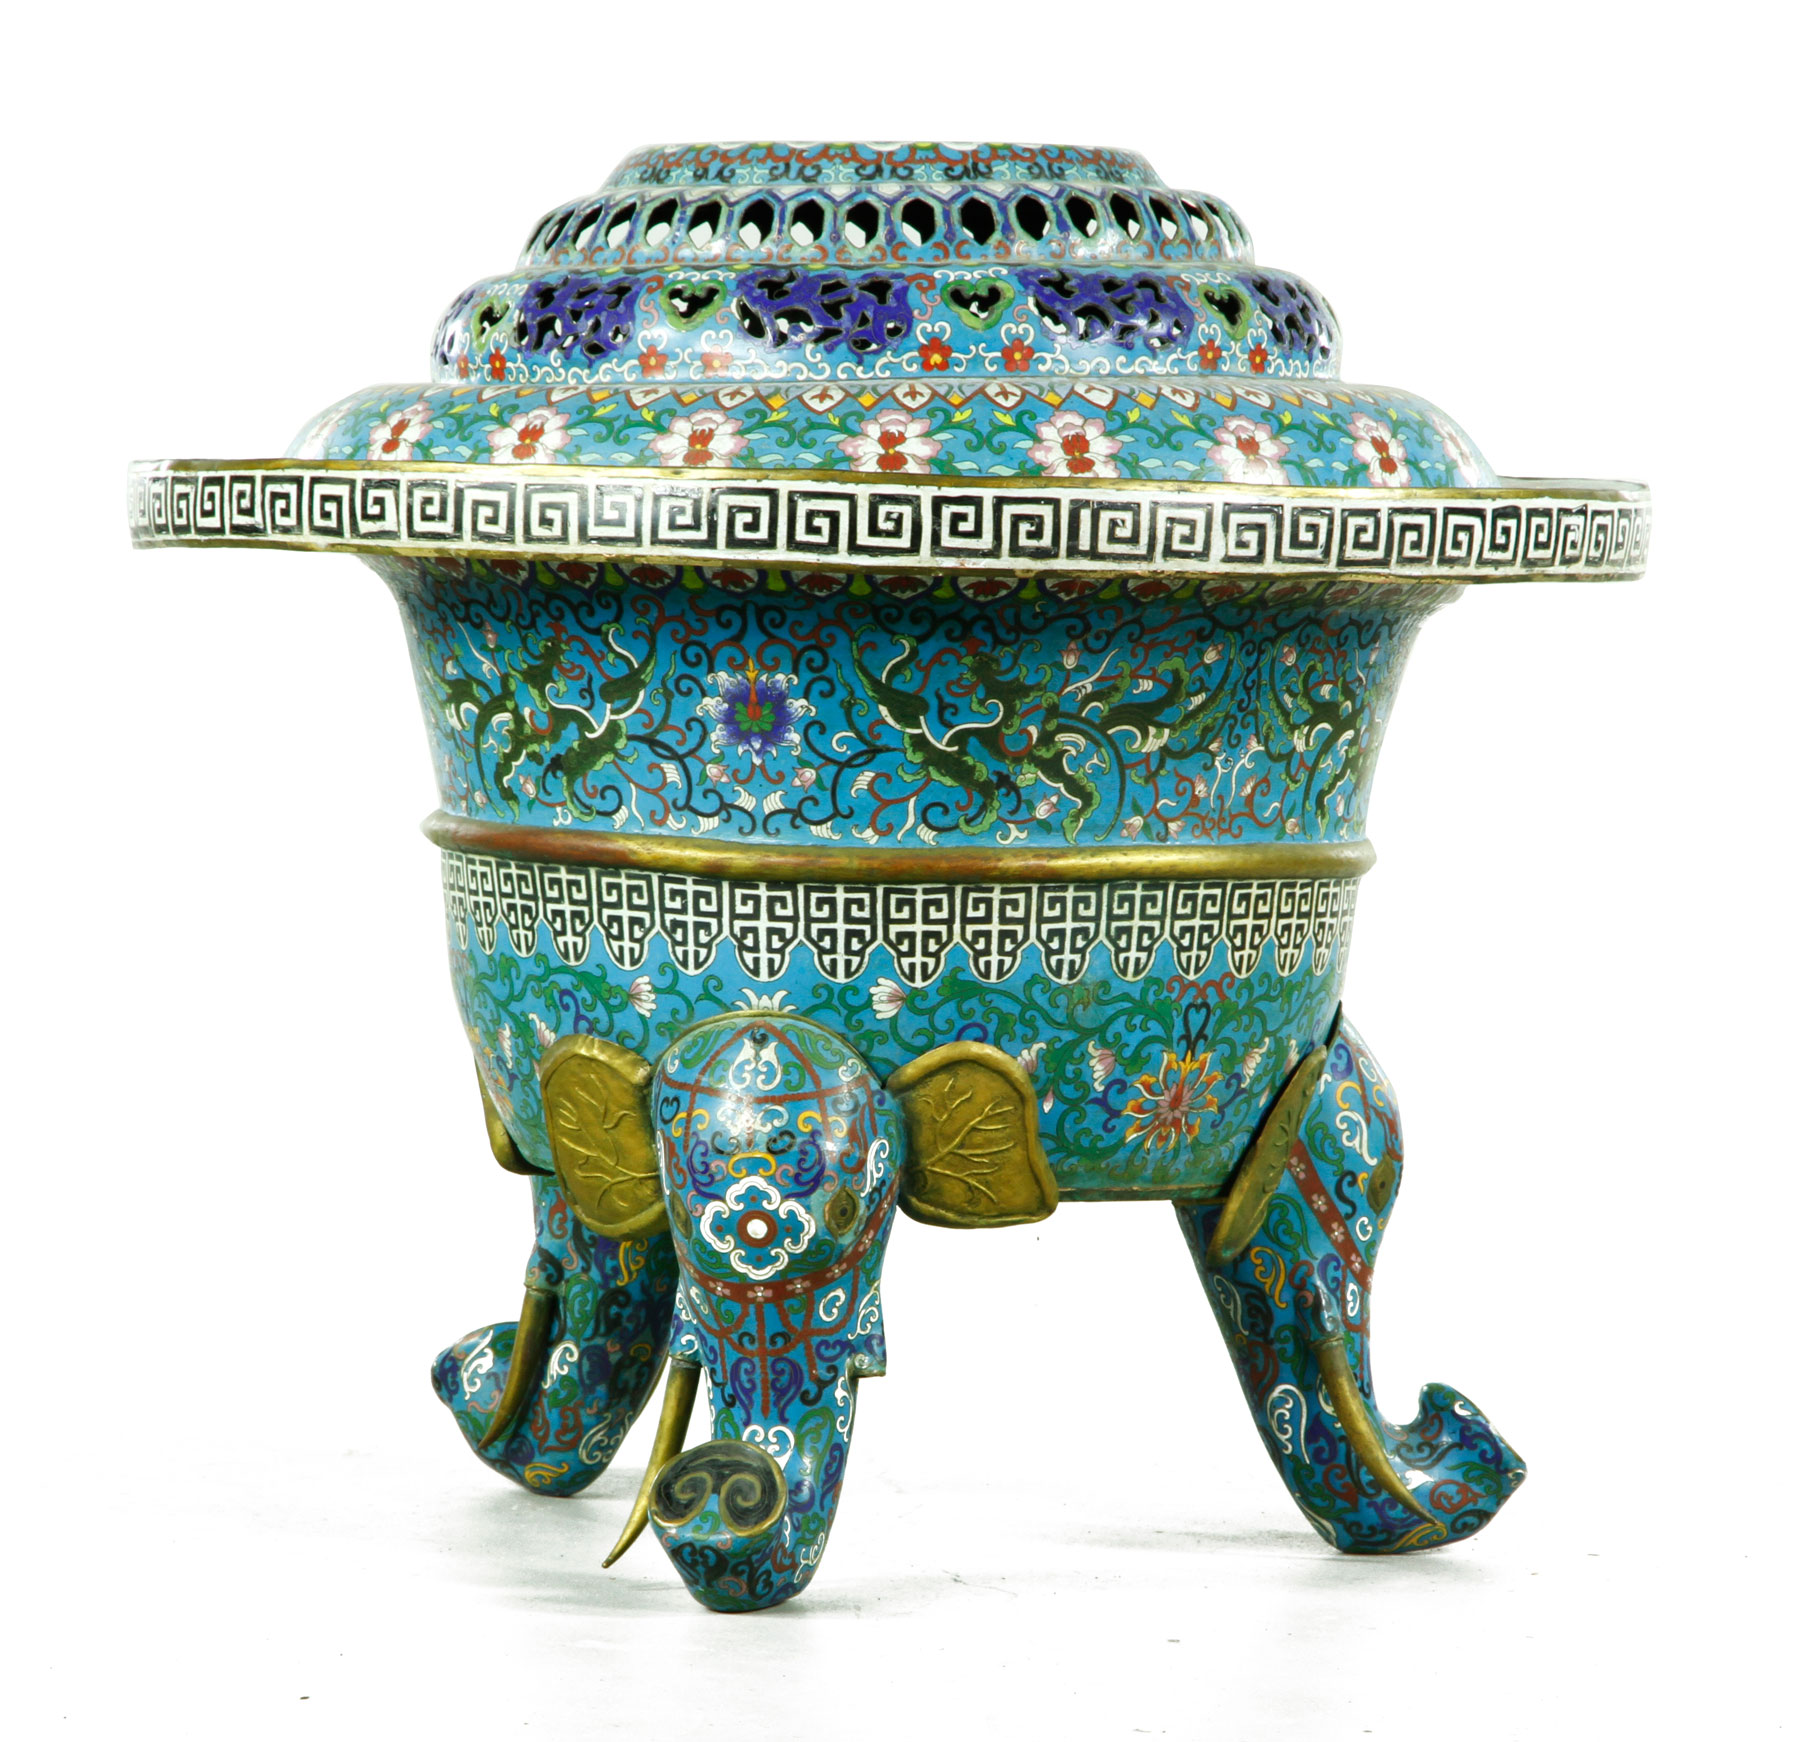 Large and rare gilt and cloisonne censer, China, 18th/19th century, with cover, the body decorated with a flying dragon design, the legs in the form of elephants, 35" h x 33" w.